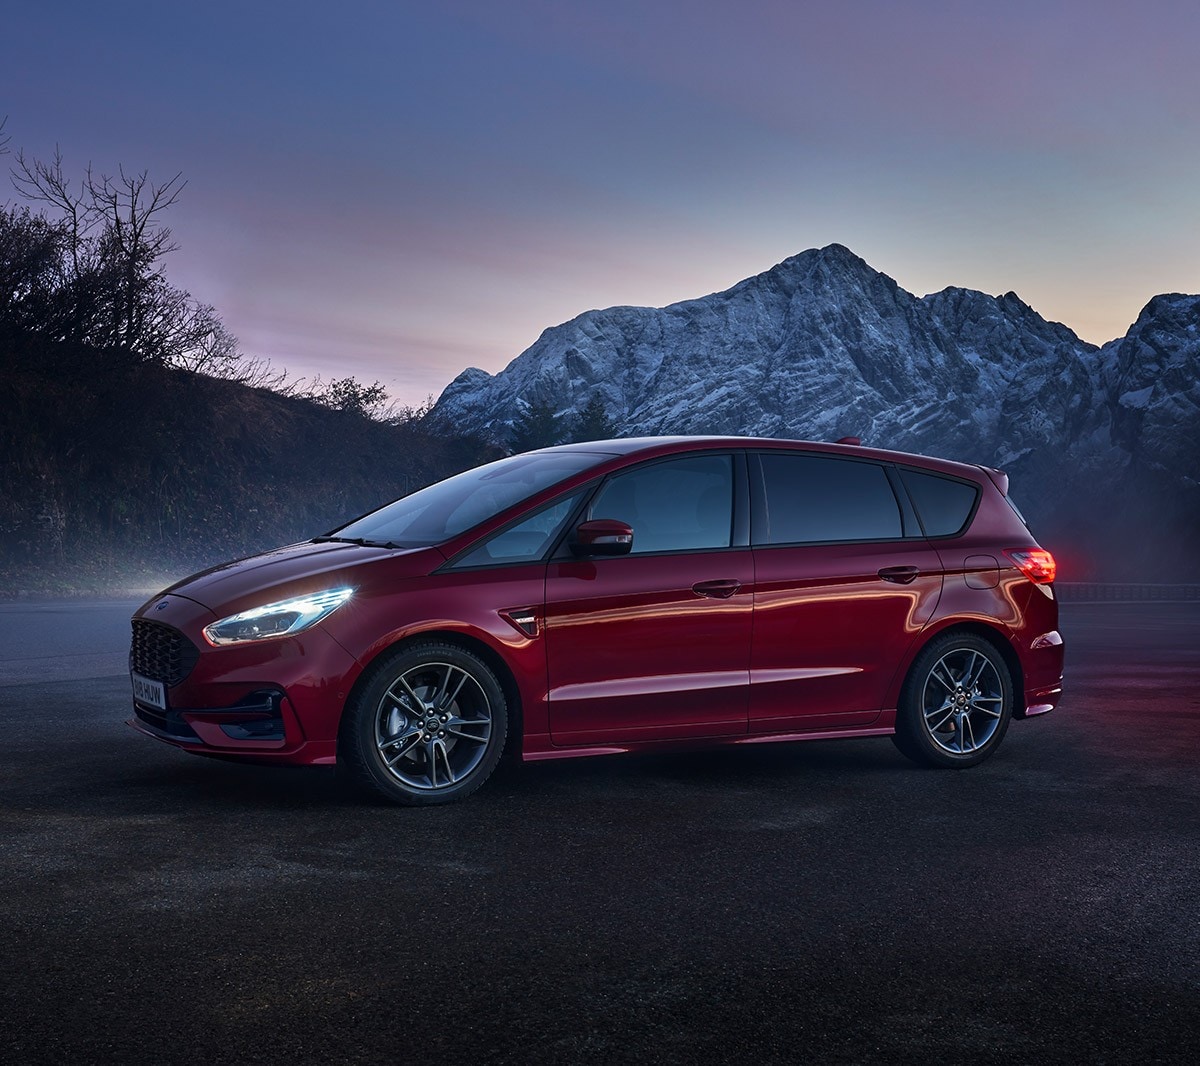 Ford S-MAX: Practical Family Car